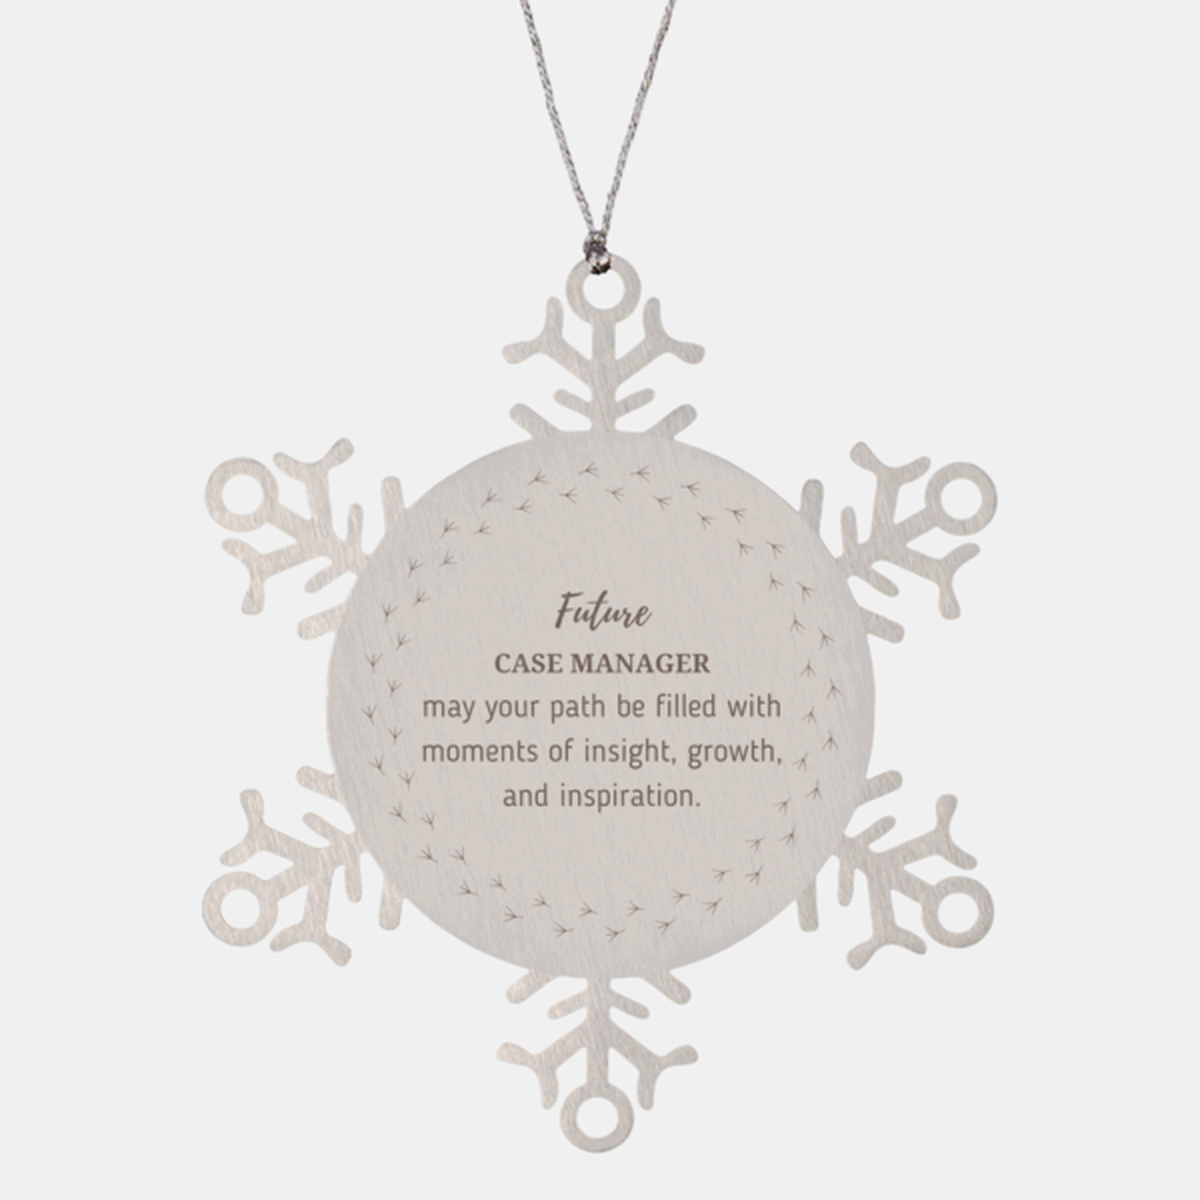 Future Case Manager Gifts, May your path be filled with moments of insight, Graduation Gifts for New Case Manager, Christmas Unique Snowflake Ornament For Men, Women, Friends